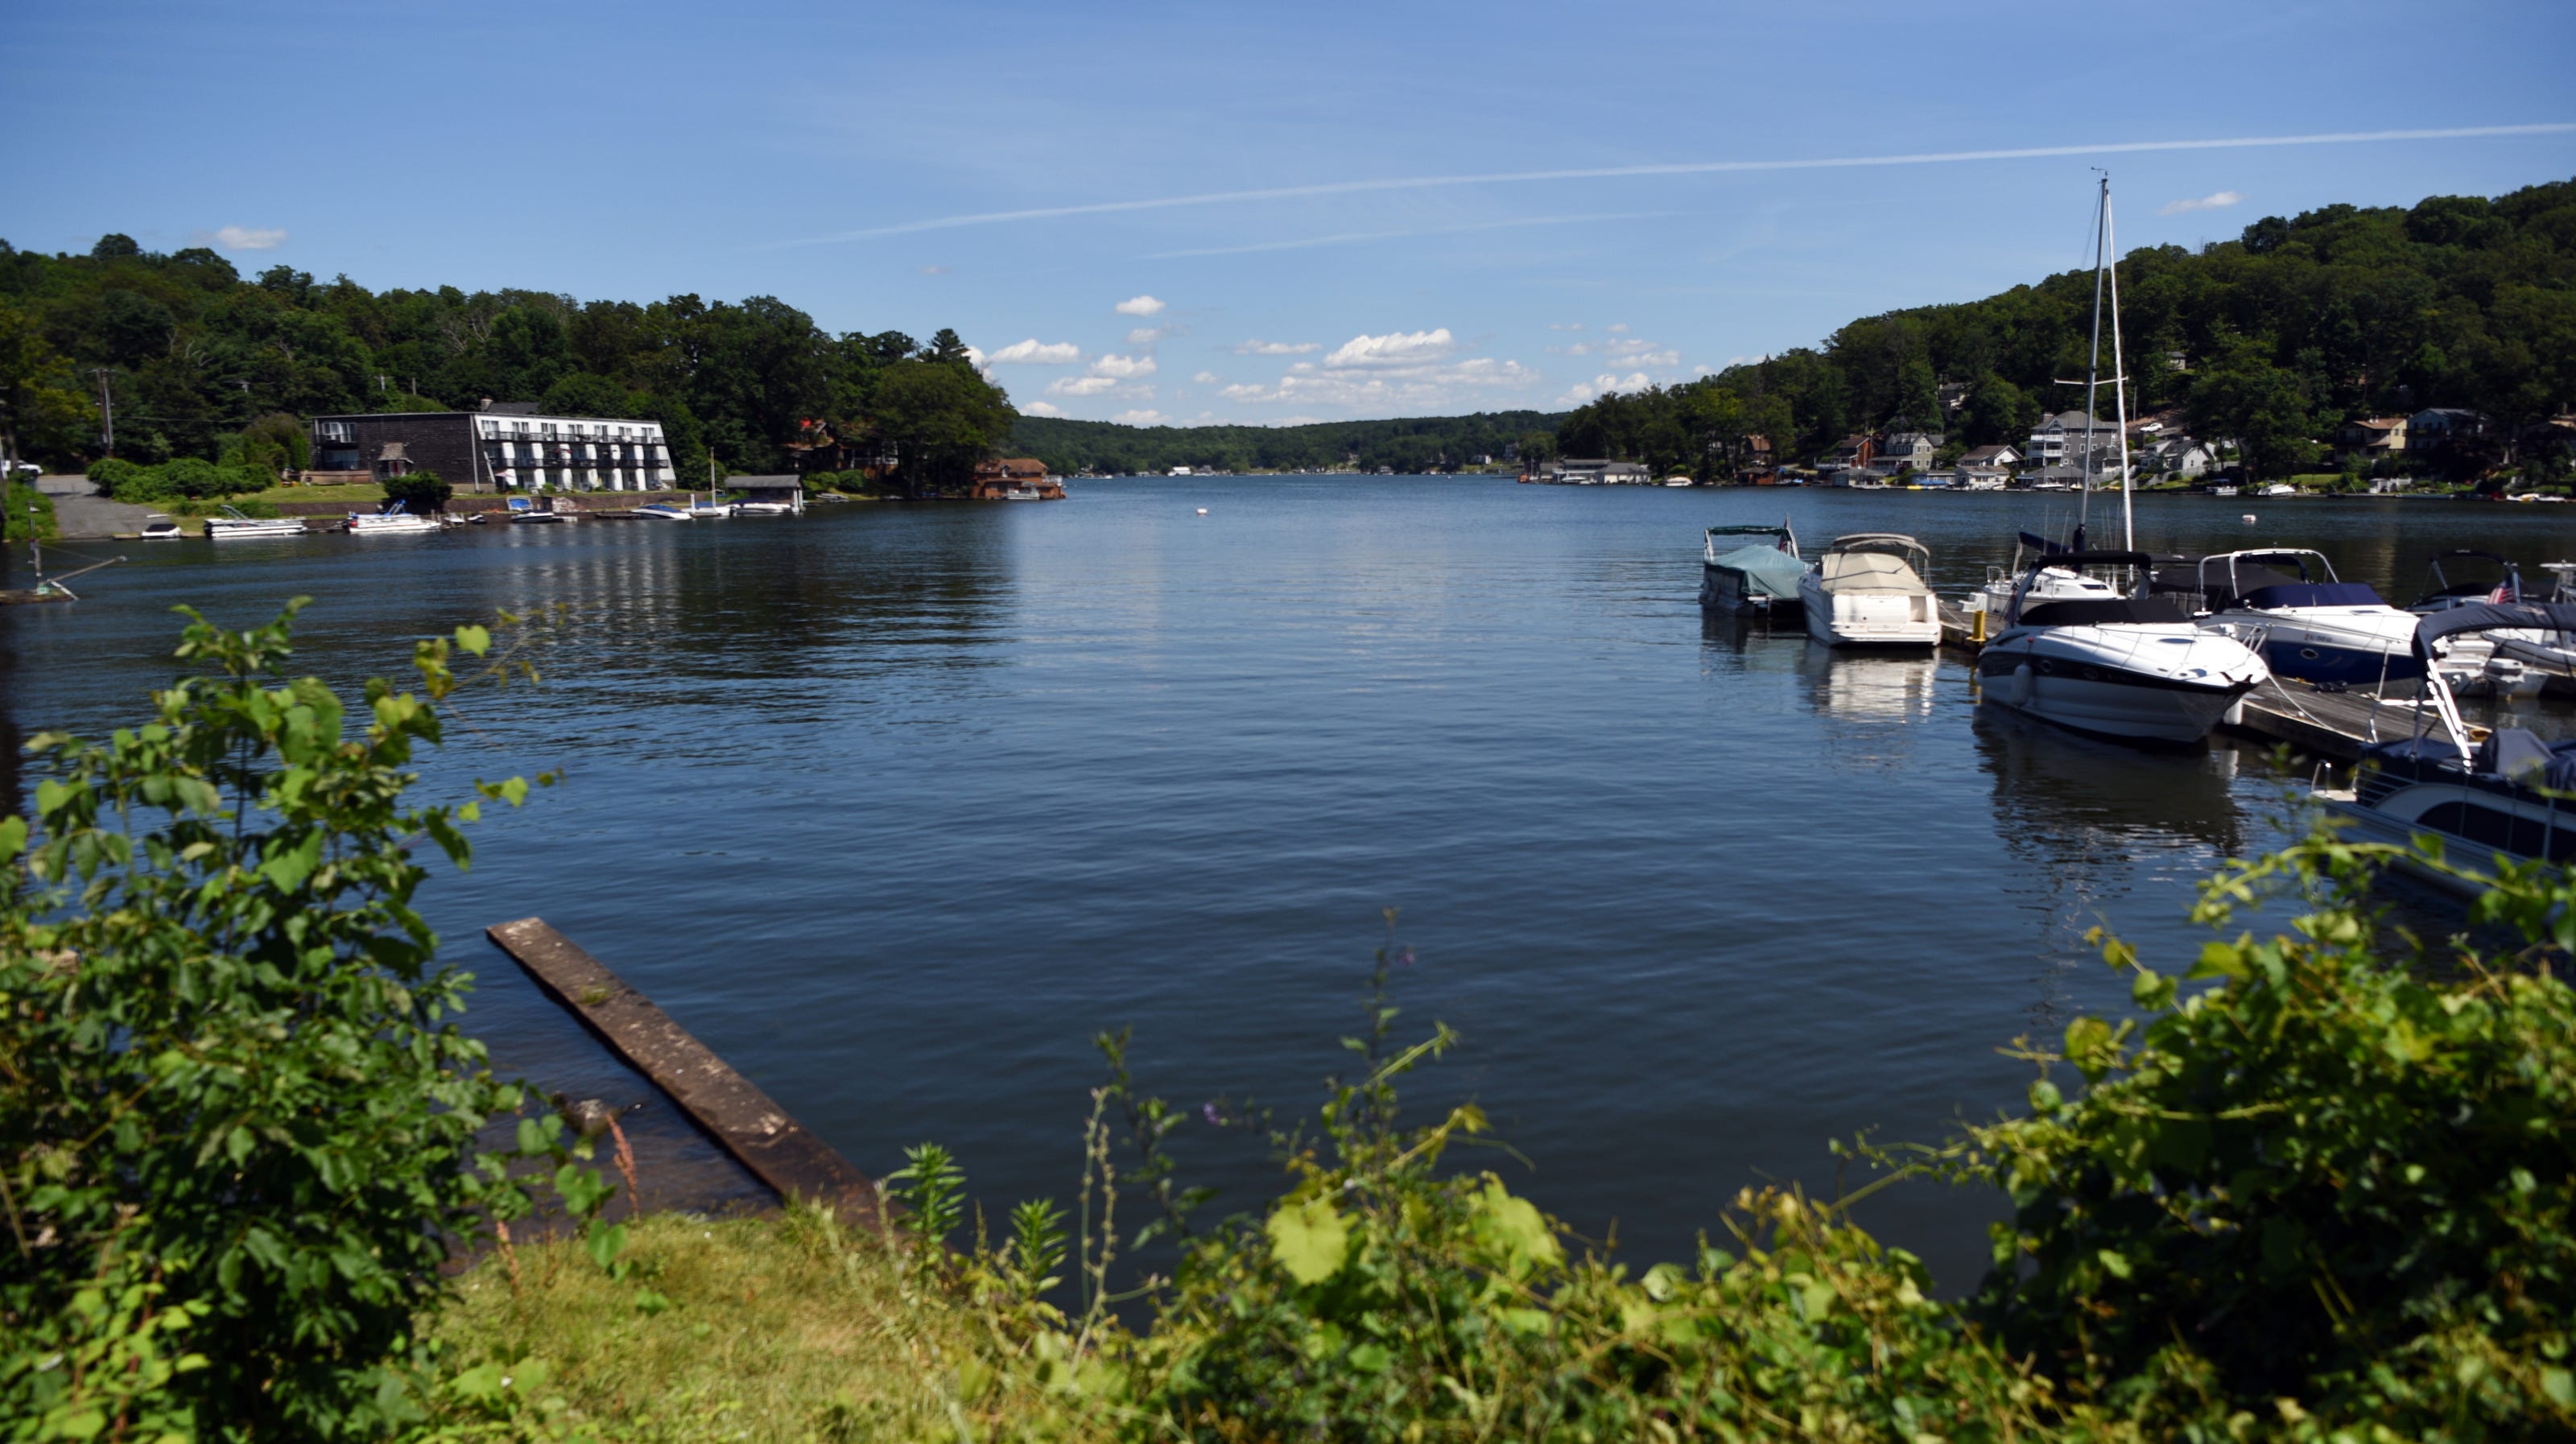 After Lake Hopatcong, it's time for NJ to step up and deal with algae ...